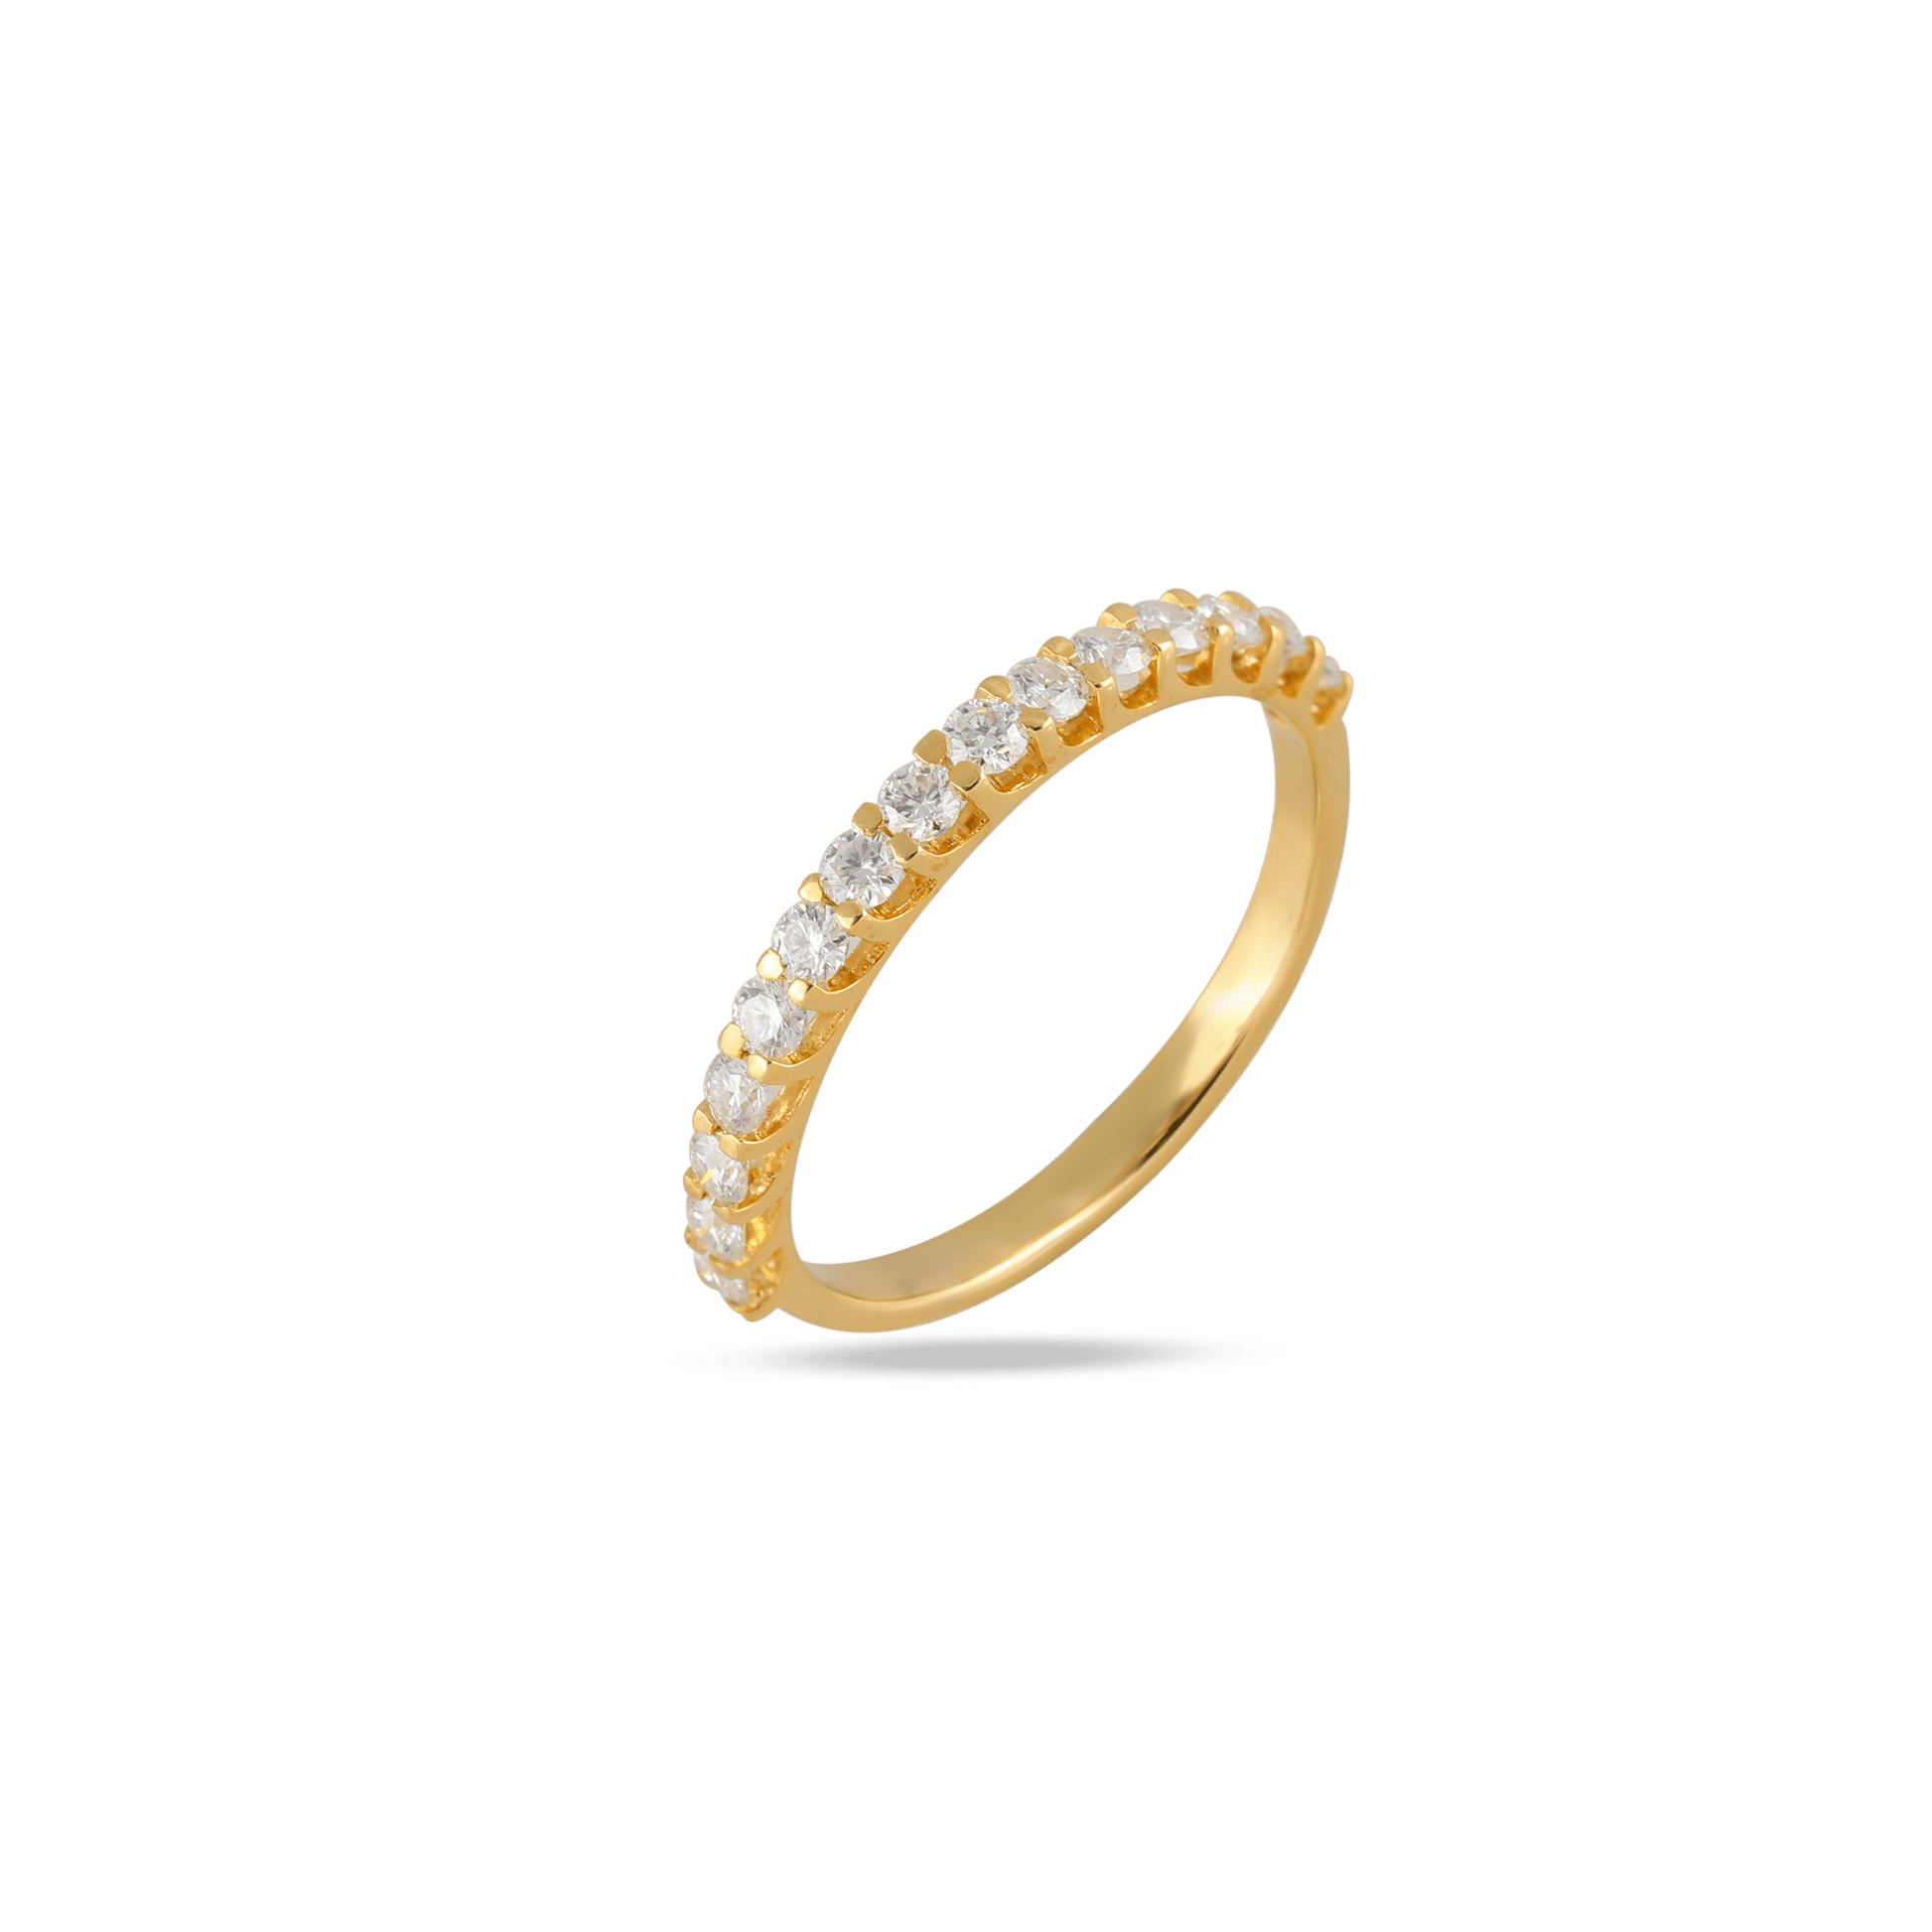 rounded square diamond ring